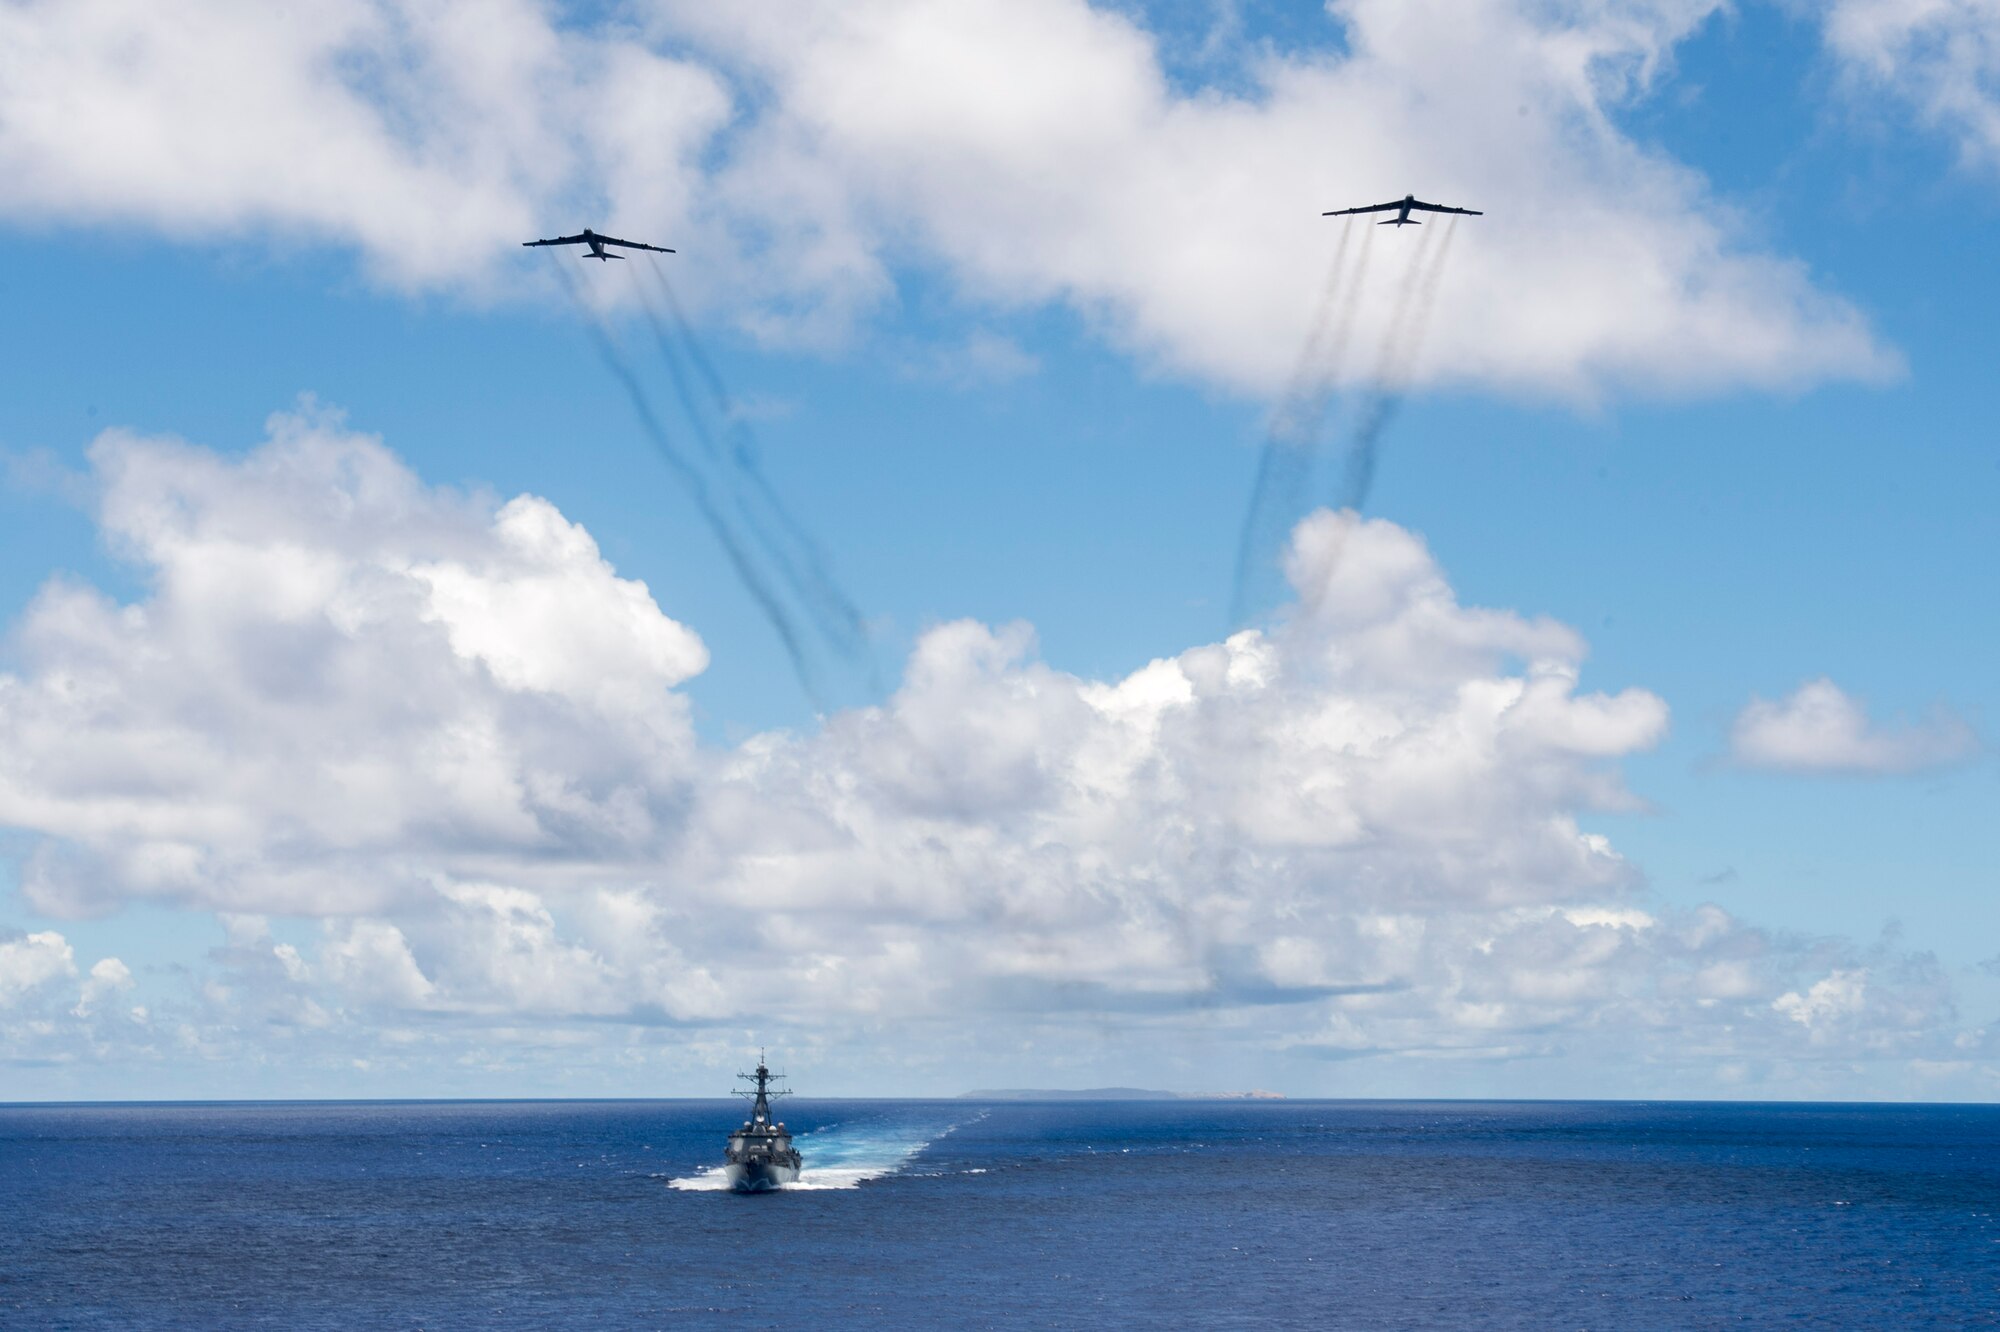 Two U.S. Air Force B-52 Stratofortress bombers assigned to the 69th Expeditionary Bomb Squadron from Andersen Air Force Base, Guam, fly overhead the U.S. Navy USS Spruance (DDG 111) guided missile destroyer following a joint-service bombing exercise in the Pacific Ocean, June 15, 2016. As part of routine continuous bomber presence operations, the bombers’ presence allows U.S. forces to integrate multiple aerial platforms in the Indo-Asia-Pacific region. (U.S. Navy photo by Petty Officer 2nd Class Will Gaskill/Released)